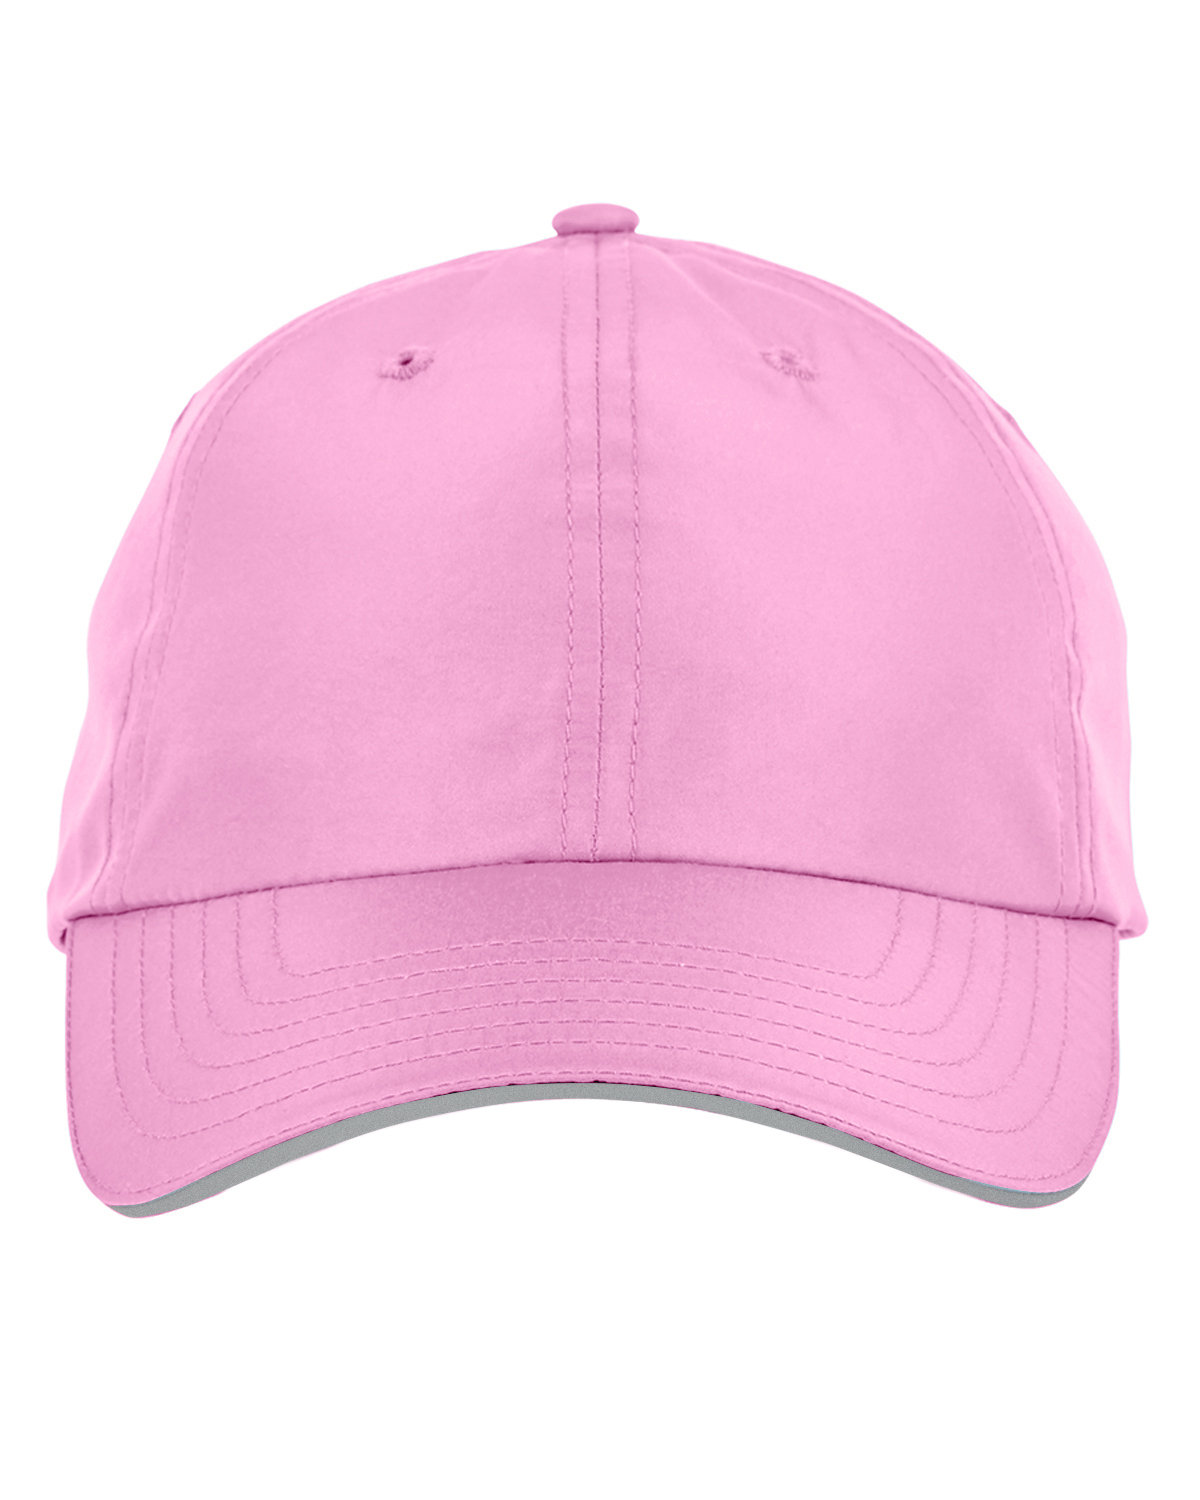 CORE365 Adult Pitch Performance Cap CHARITY PINK 